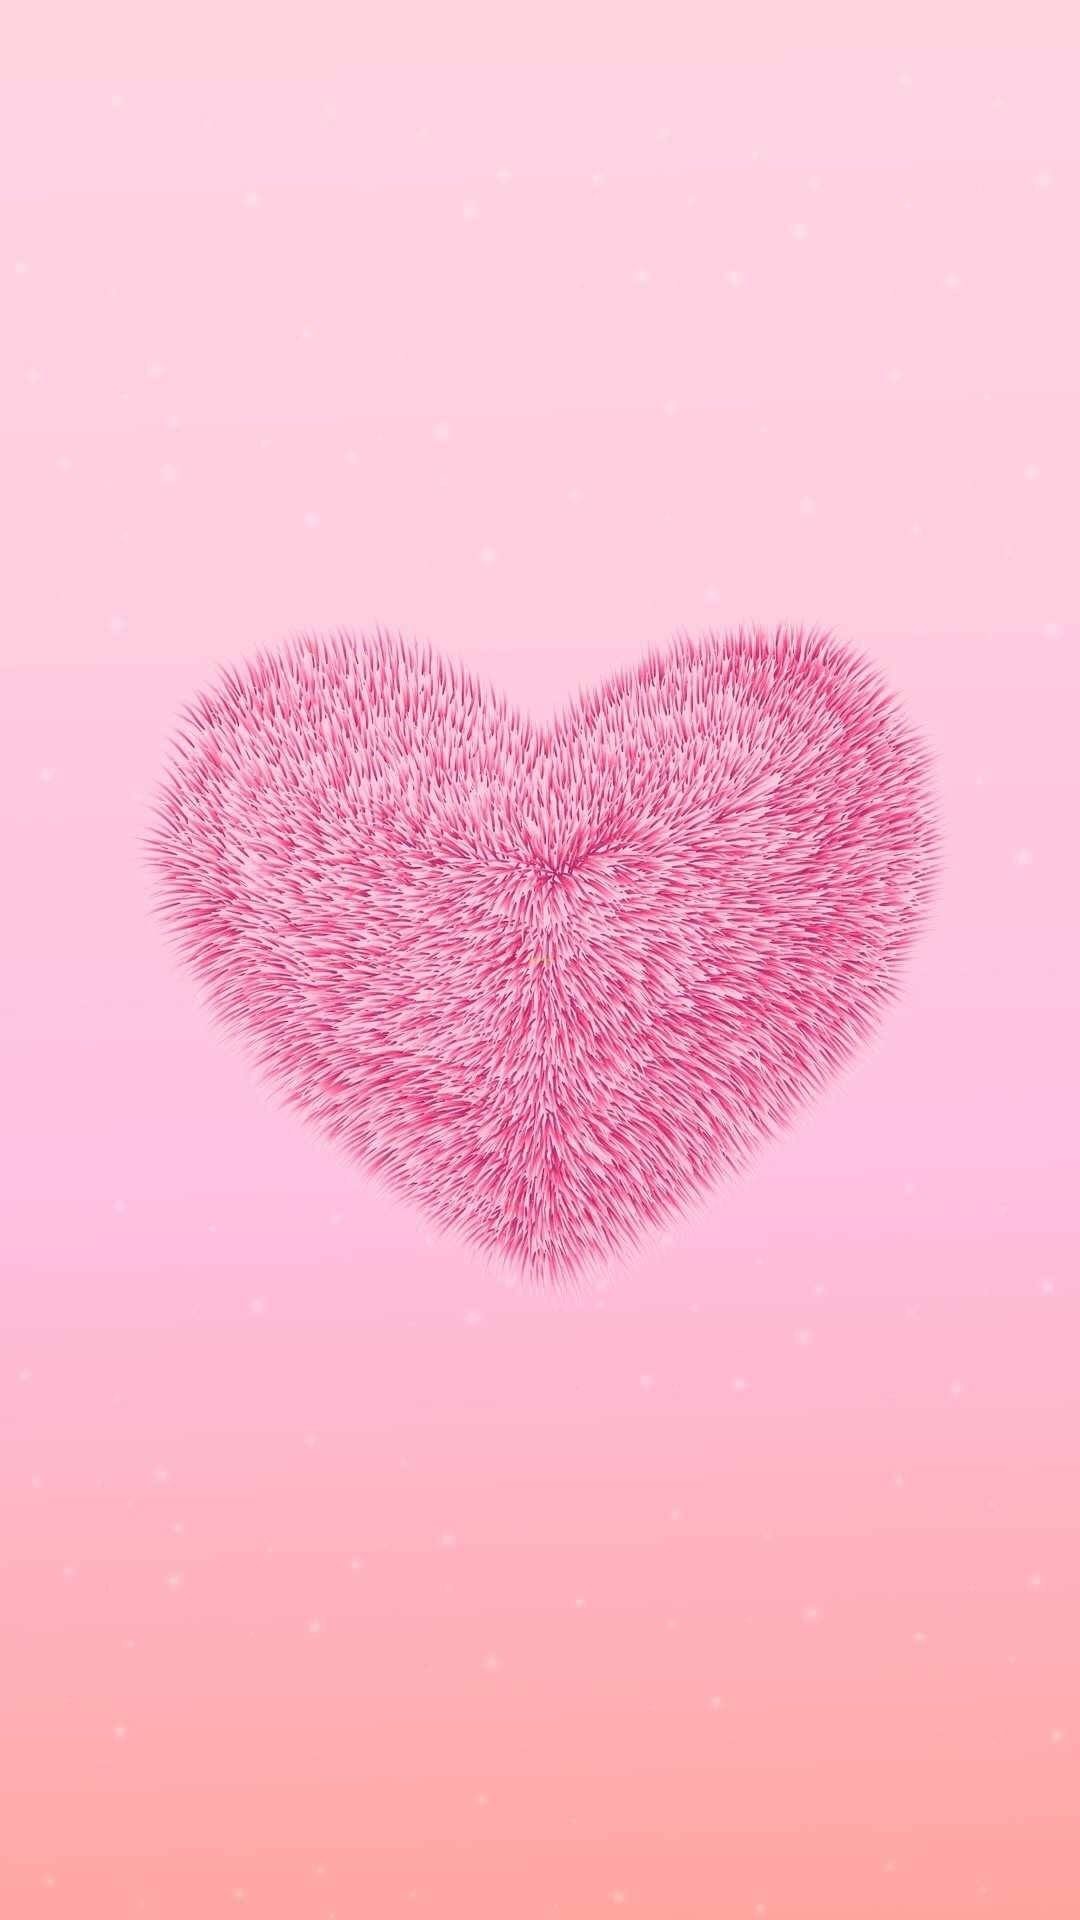 Cute Heart Wallpapers Wallpapers